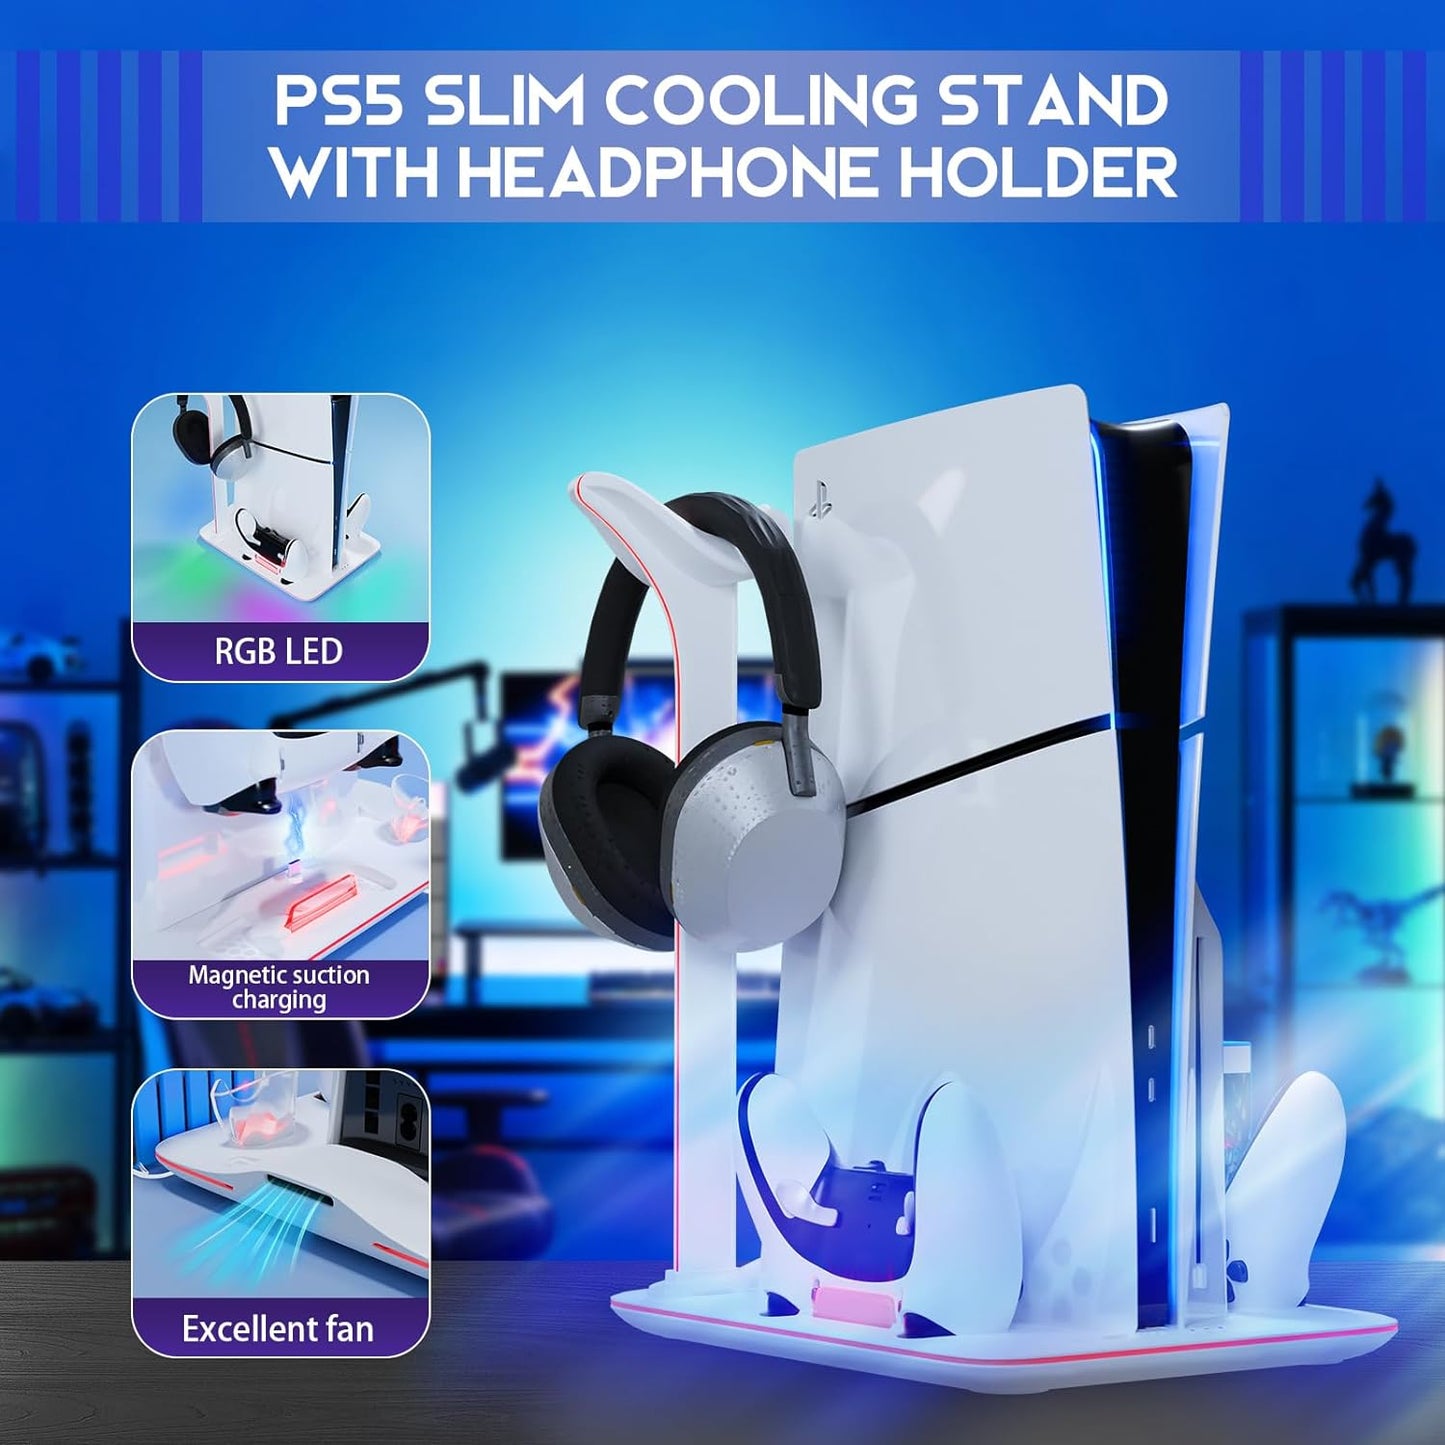 Cooling Stand for PS5 Slim Console, Dual Controller Charger, PS5 Slim Accessory with 7 RGB Lights, 3-Stage Cooling Fan, Headphone Stand (Only for Playstation 5 Slim Digital/Disc Edition)